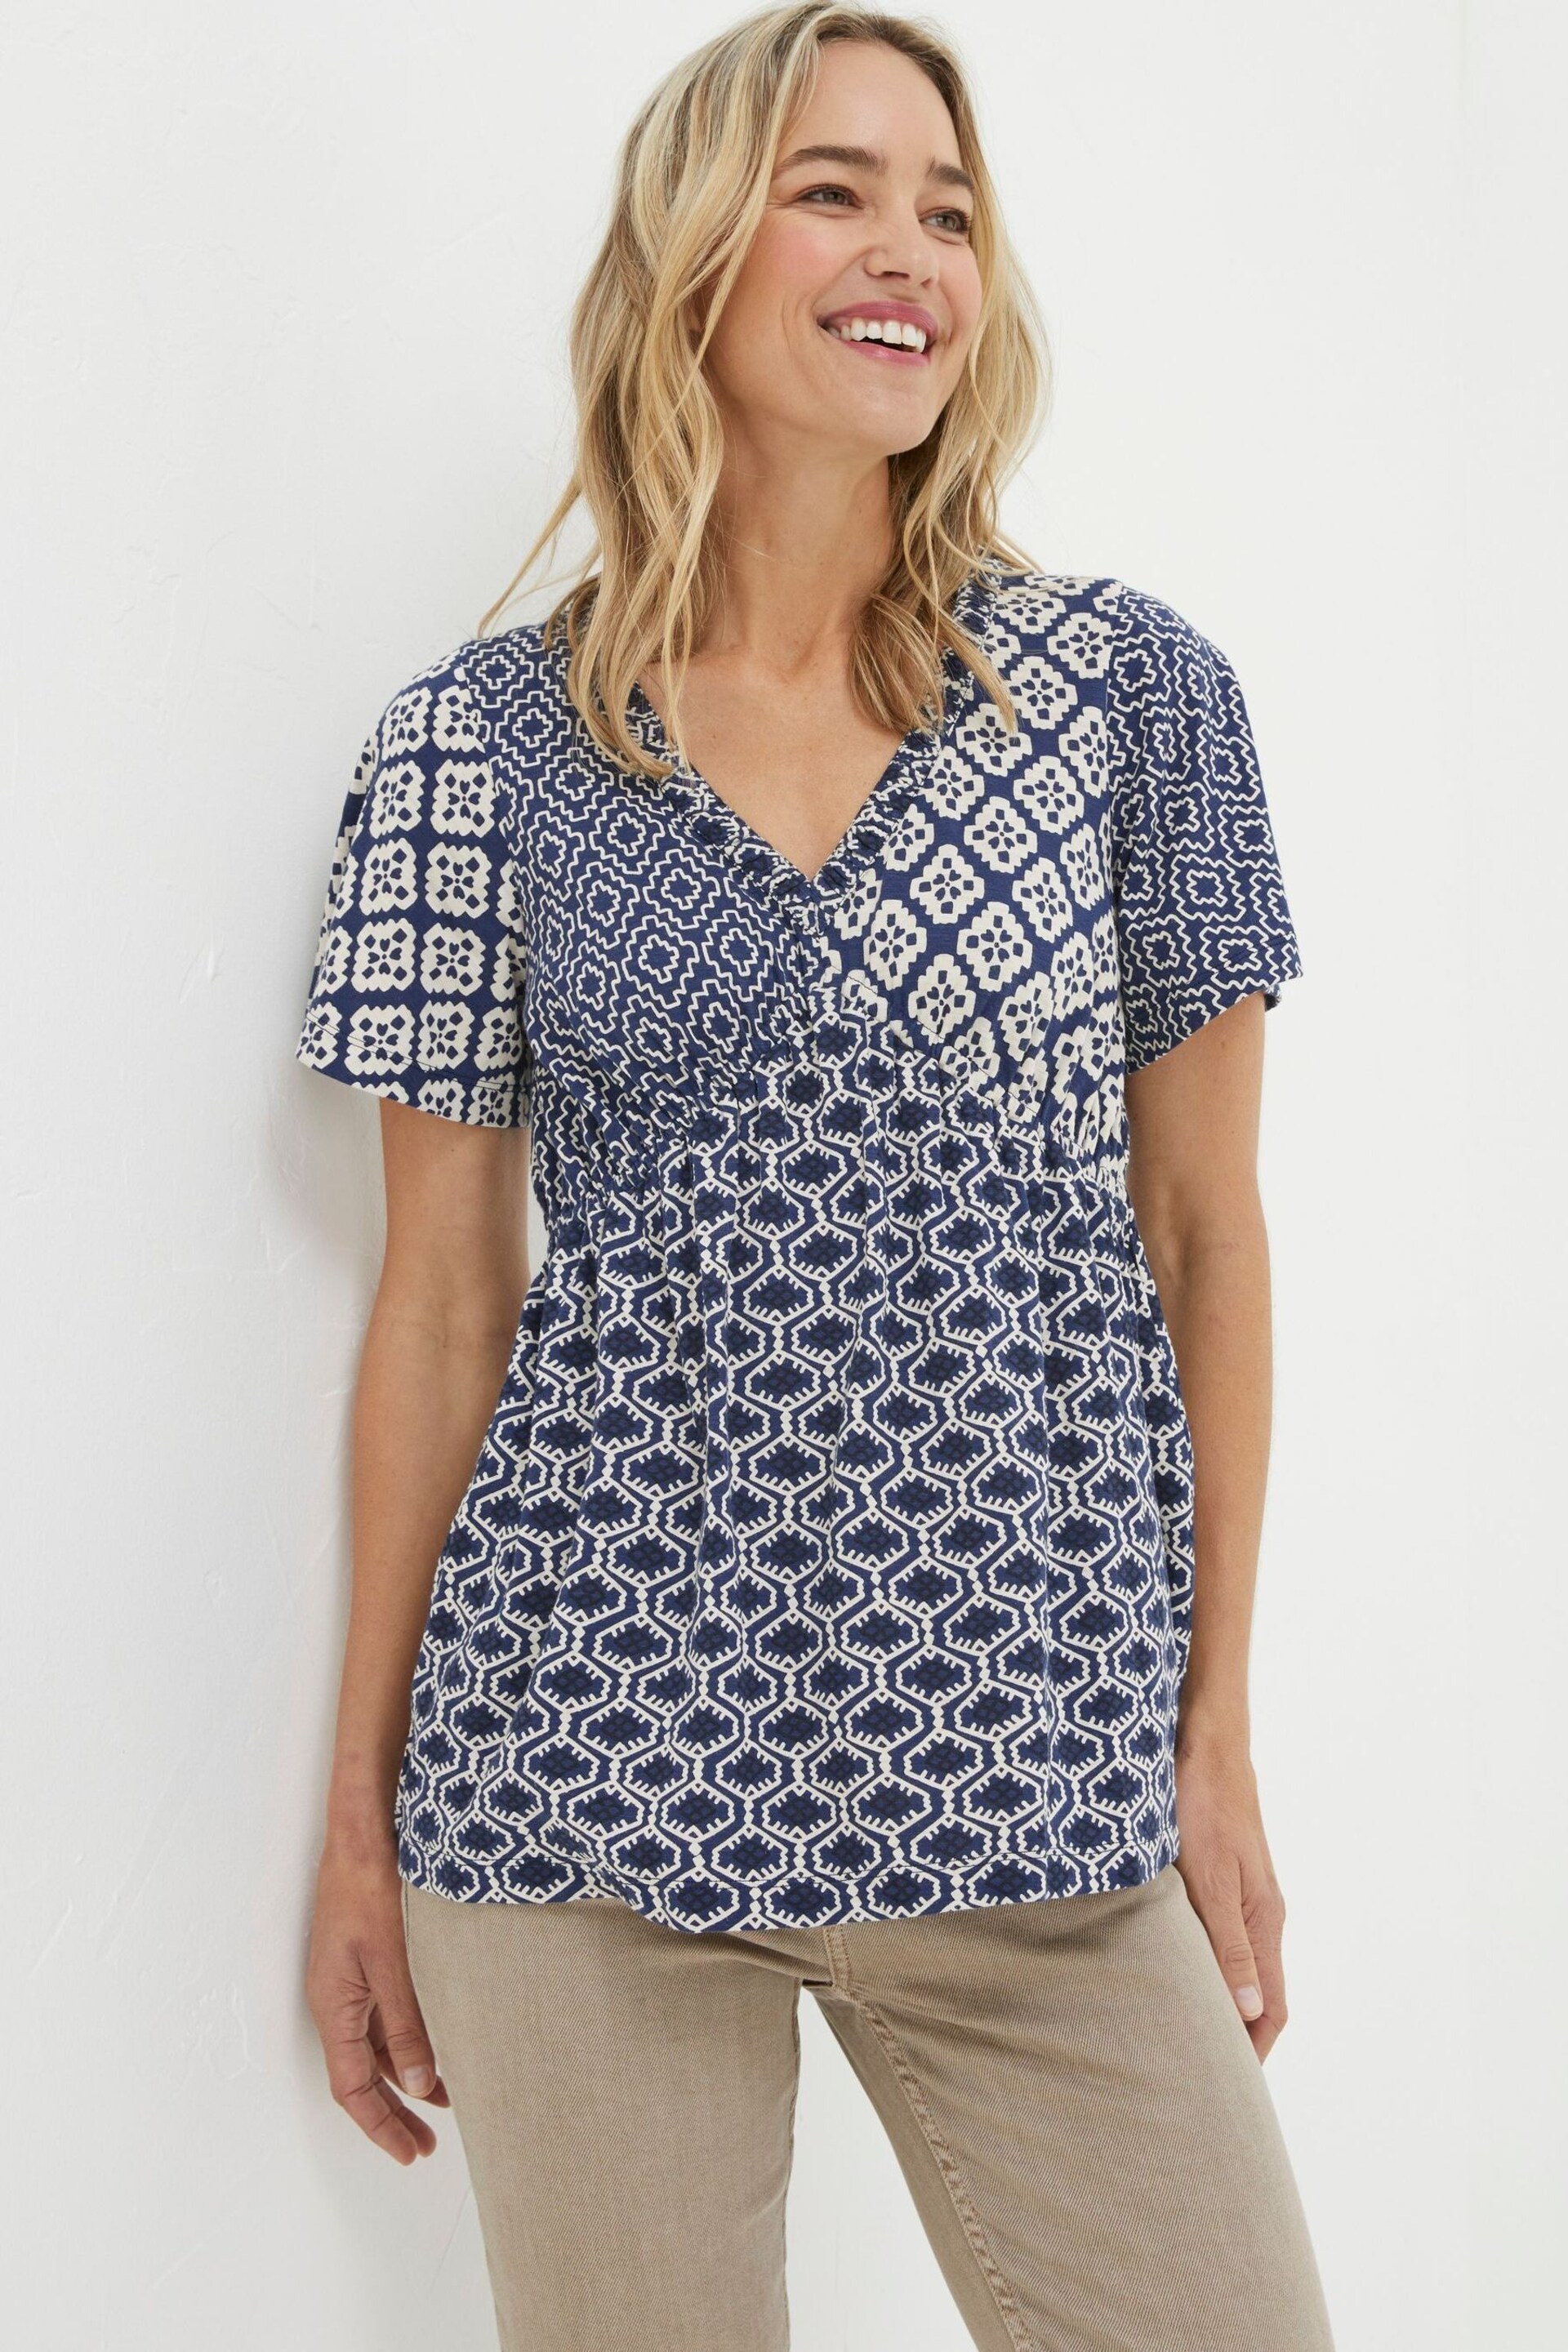 FatFace Blue Frankie Patchwork Geo Blouses - Image 1 of 5